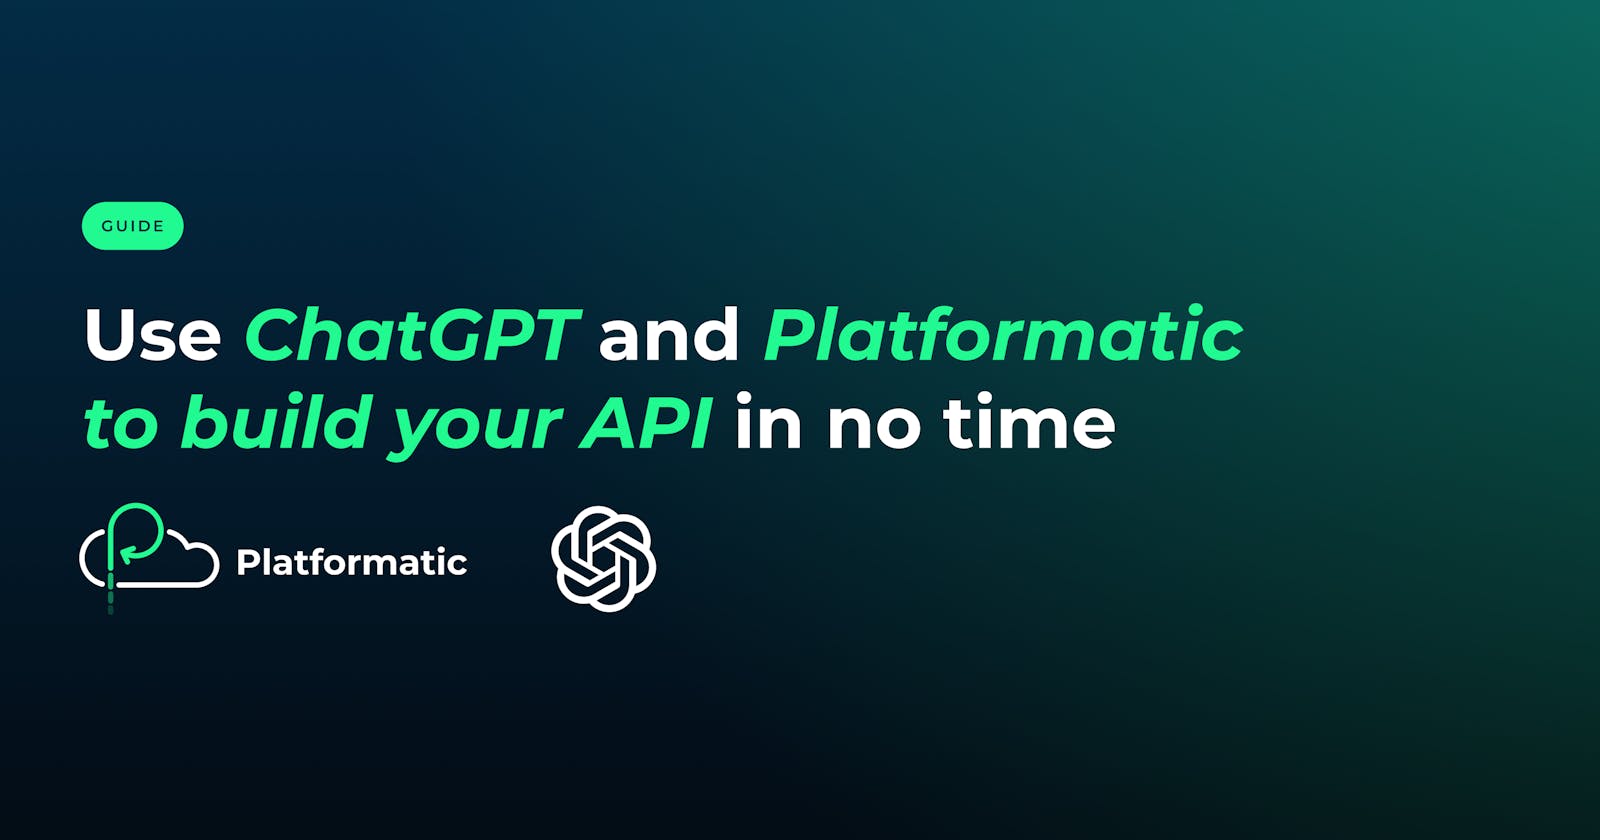 Use ChatGPT and Platformatic to Build Your API in No Time